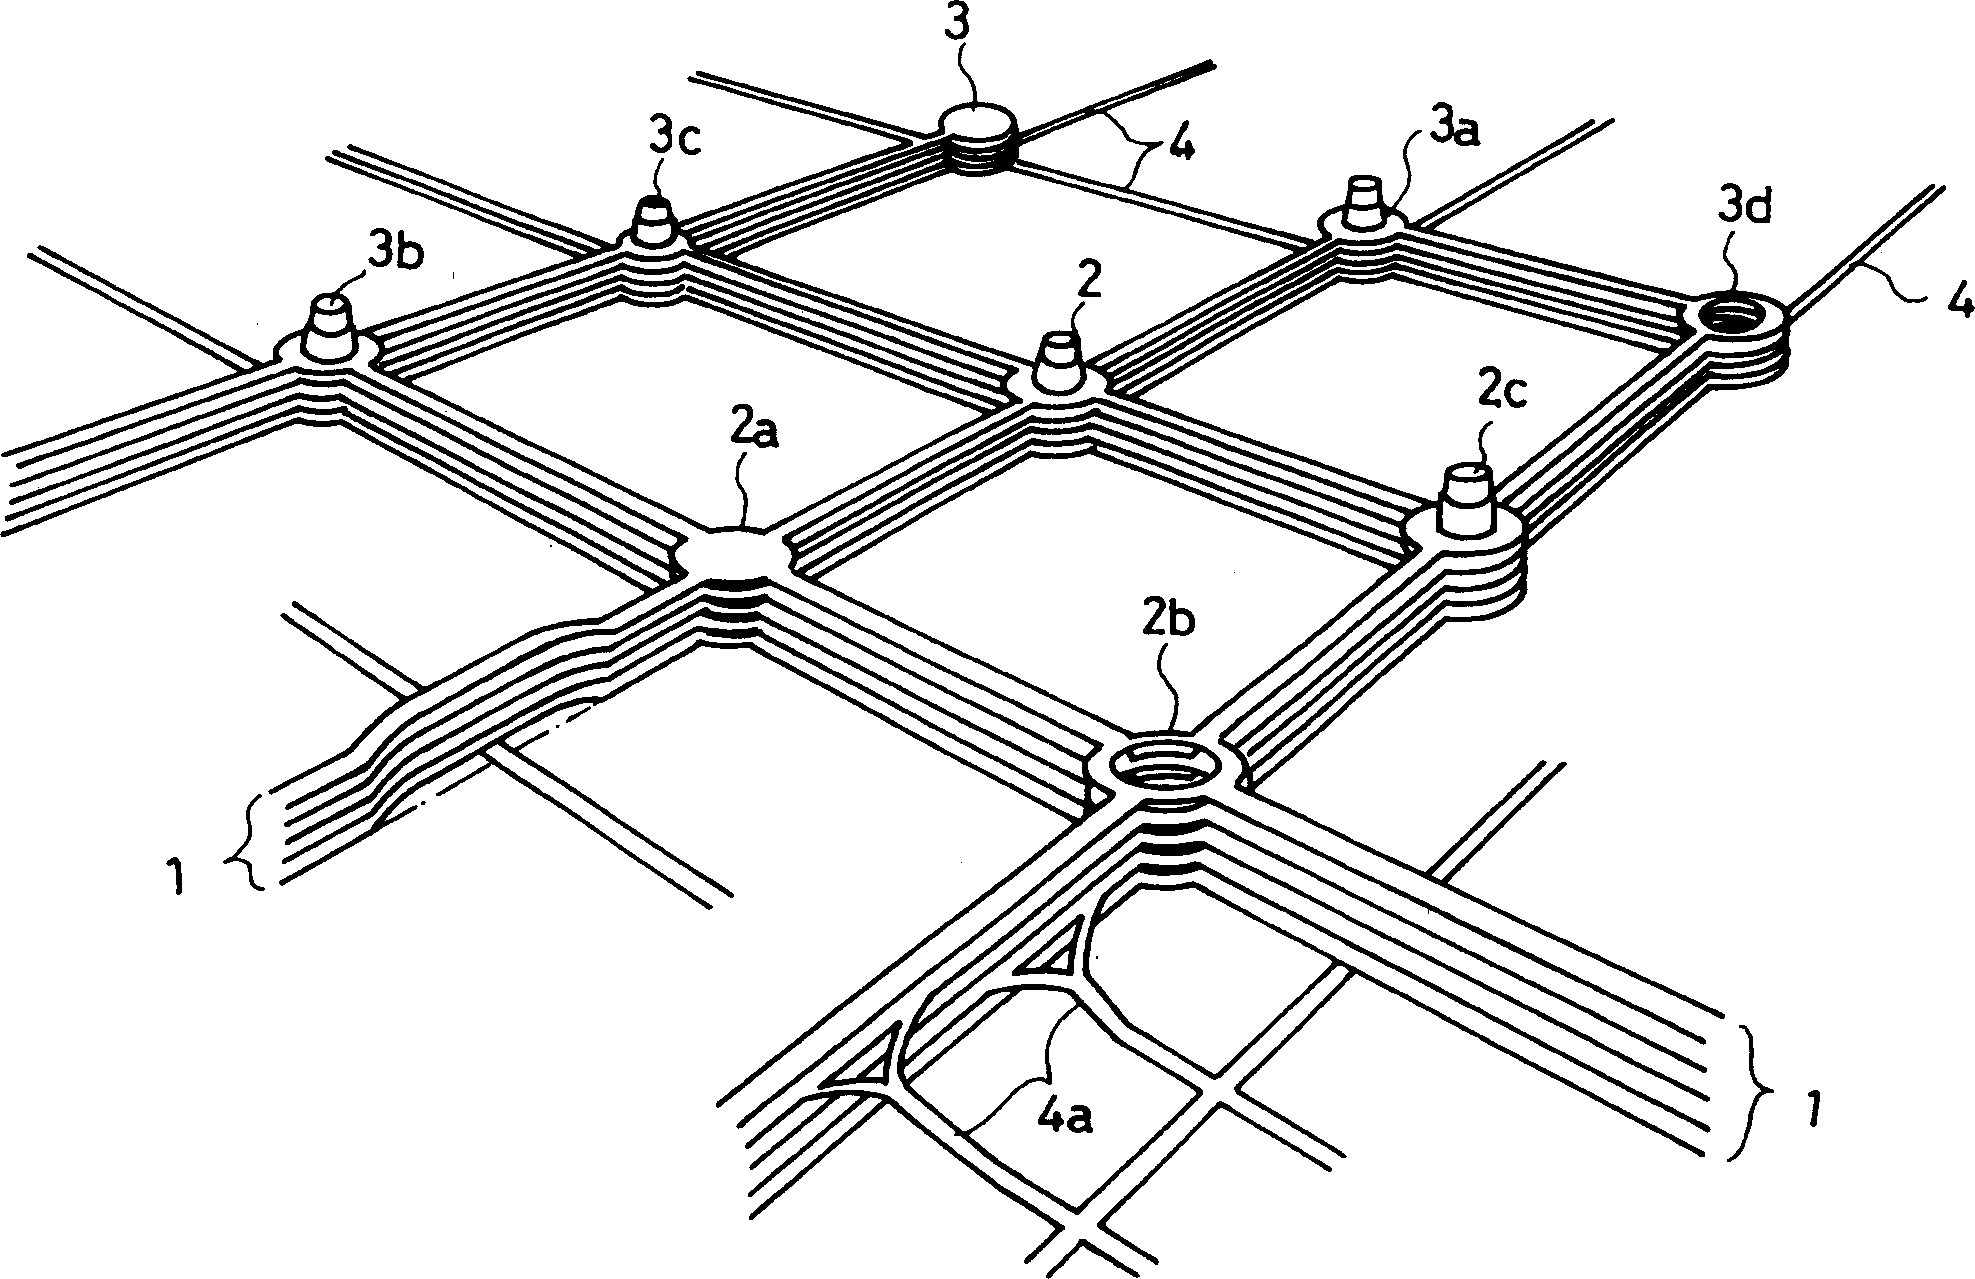 Multi-layer road system